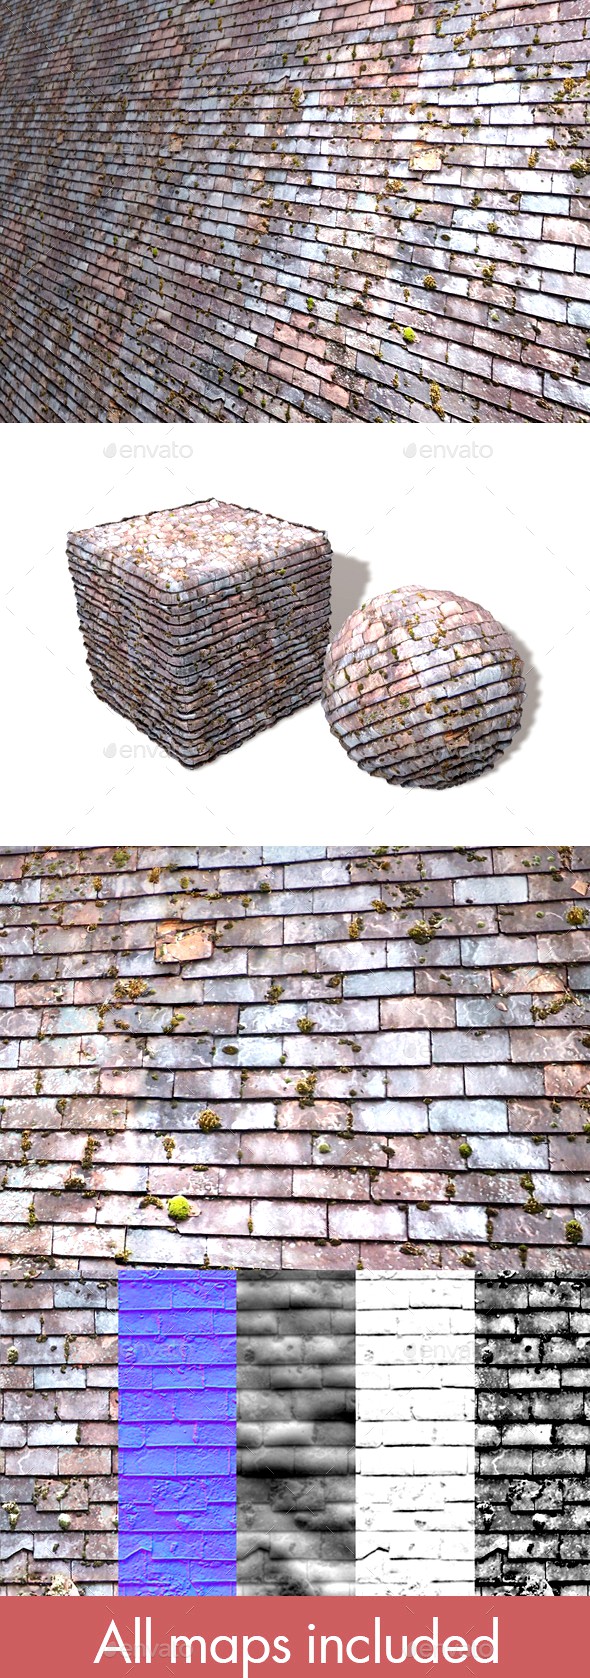 Old Mossy Roof Tiles Seamless Texture